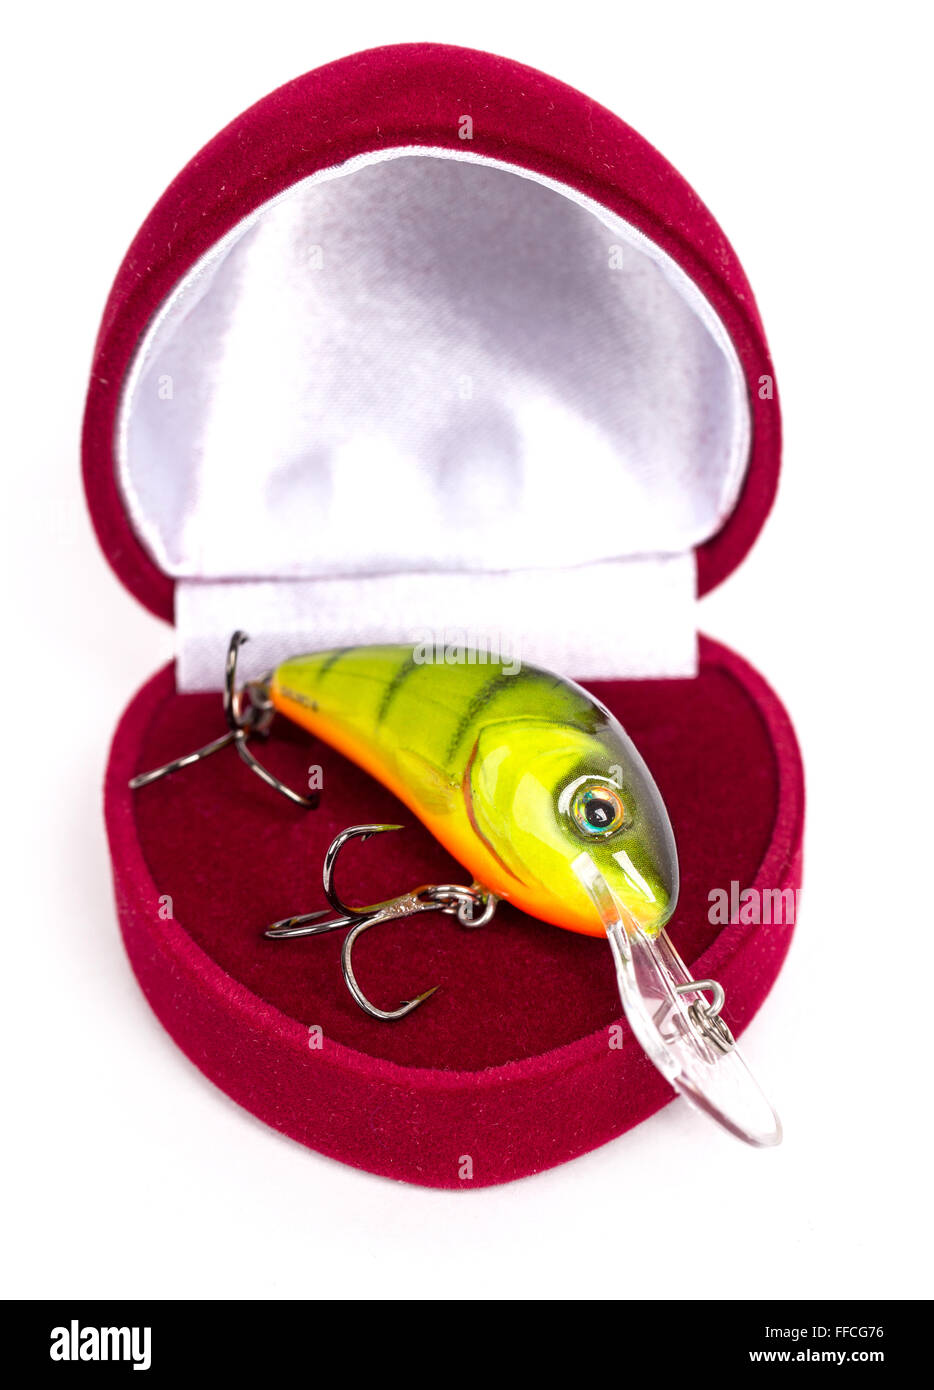 https://c8.alamy.com/comp/FFCG76/valentines-day-fishing-surprise-present-open-red-box-of-heart-on-tackles-FFCG76.jpg